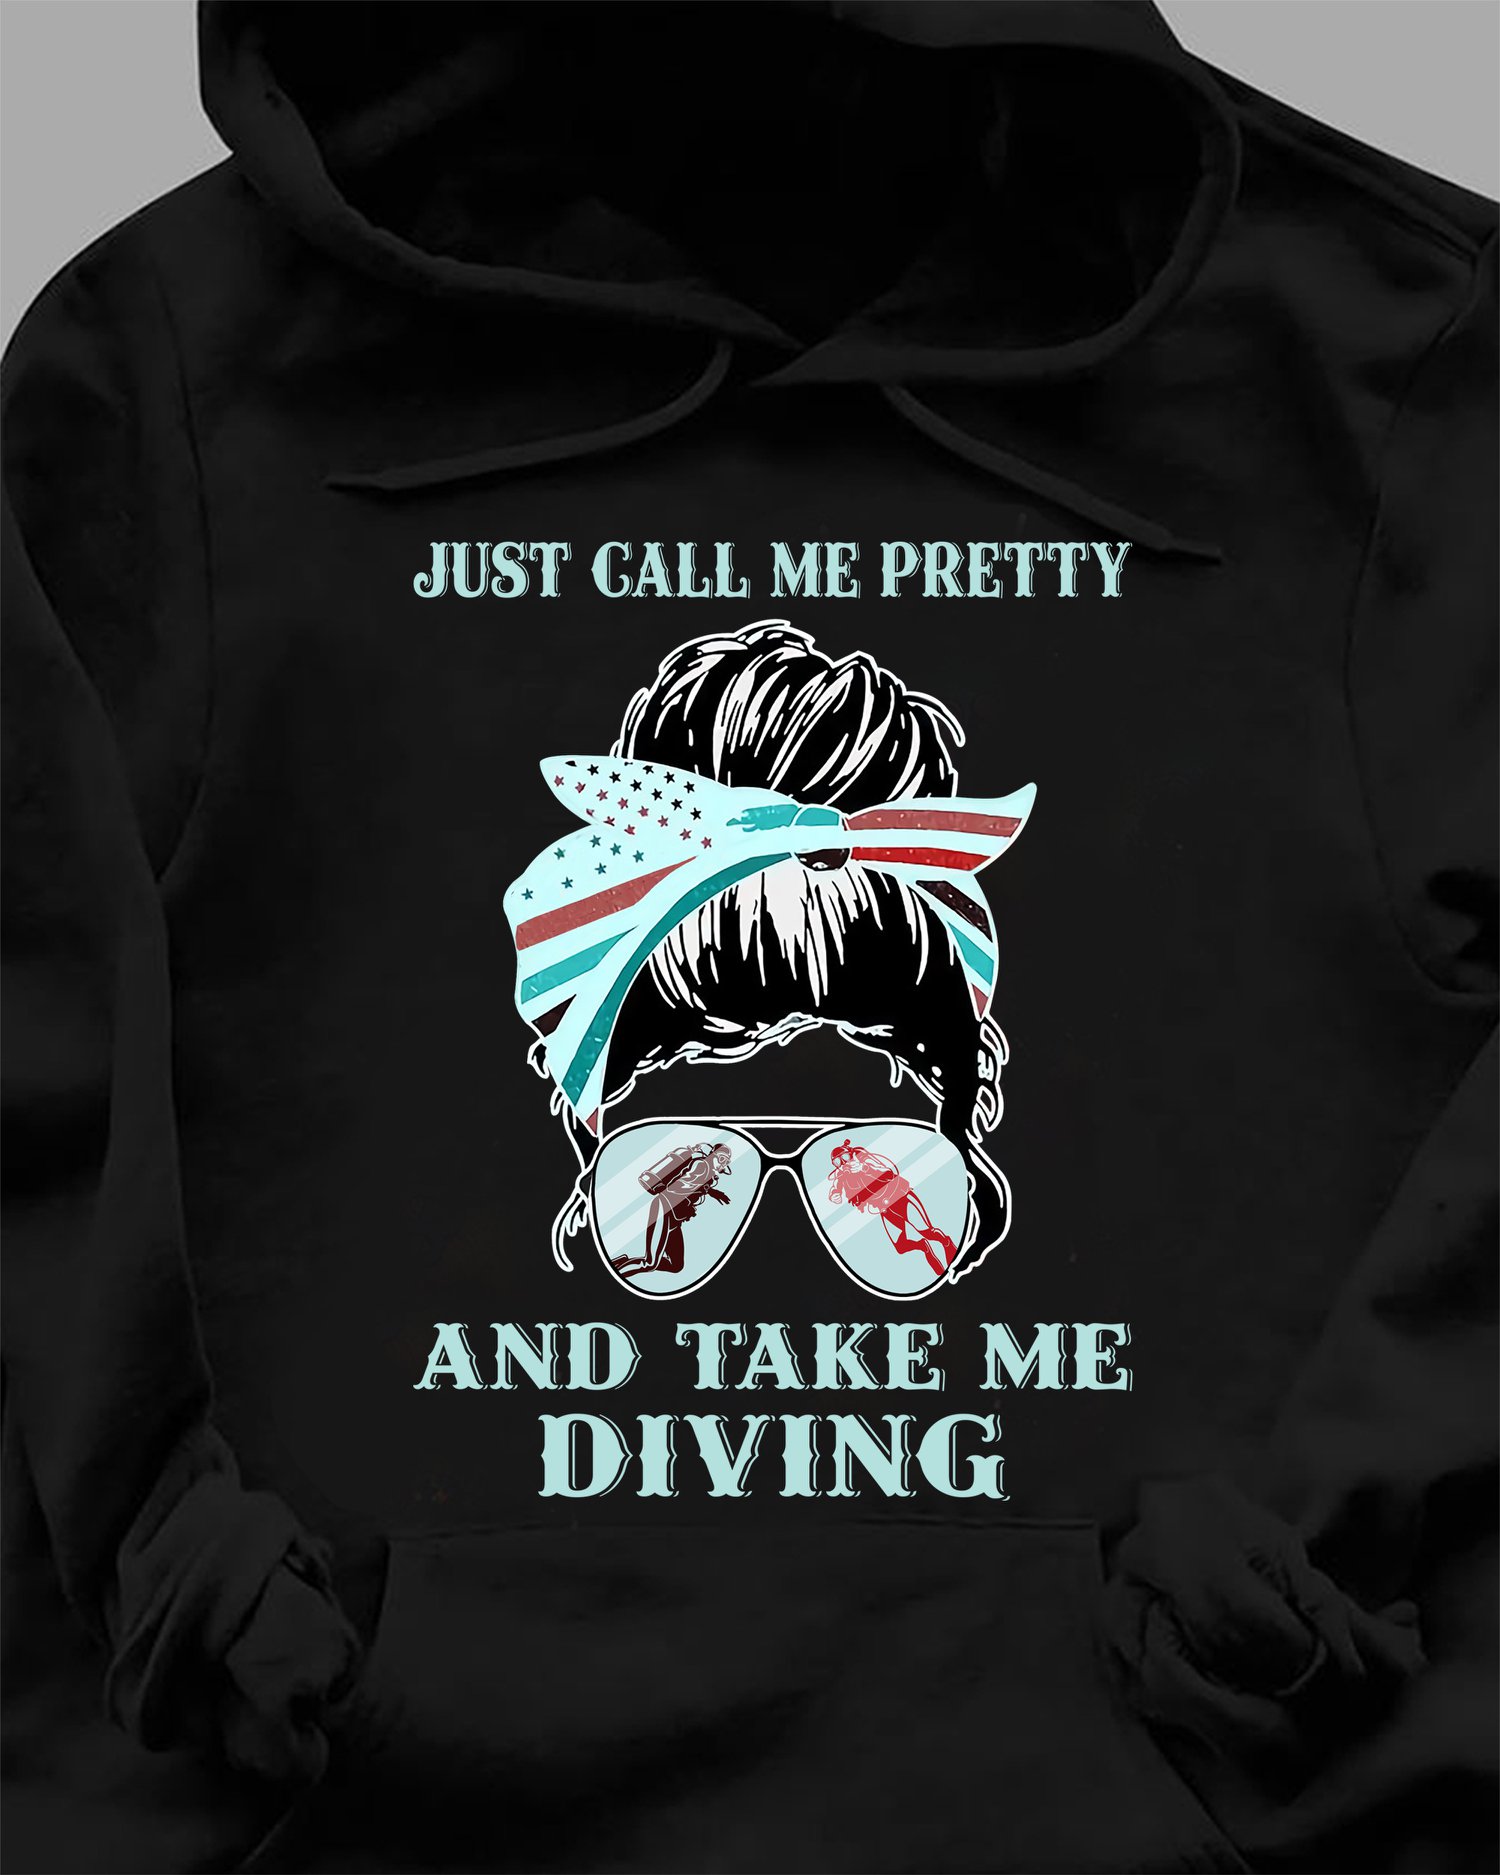 Just call me pretty and take me diving - Woman love diving